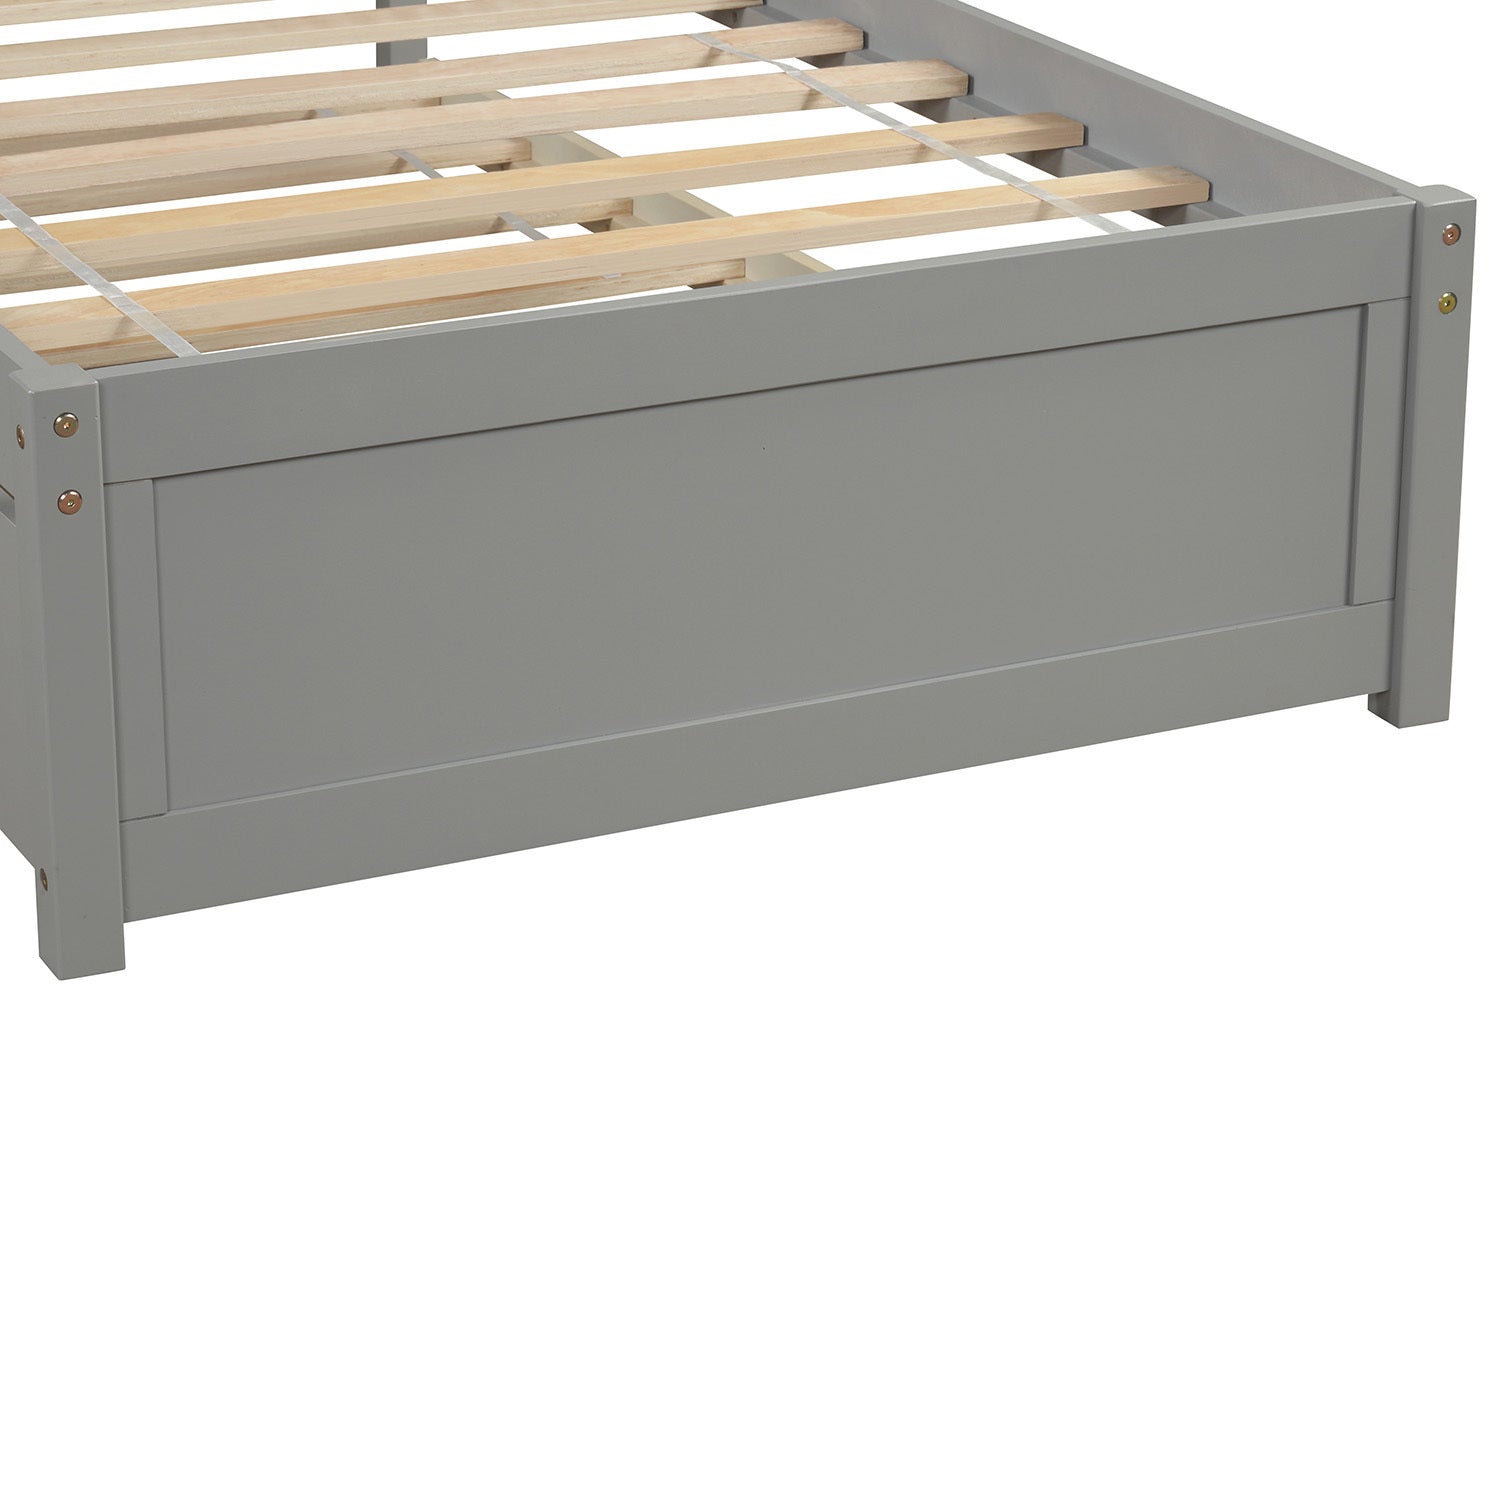 Twin size Platform Bed Wood Bed Frame with Trundle, Gray